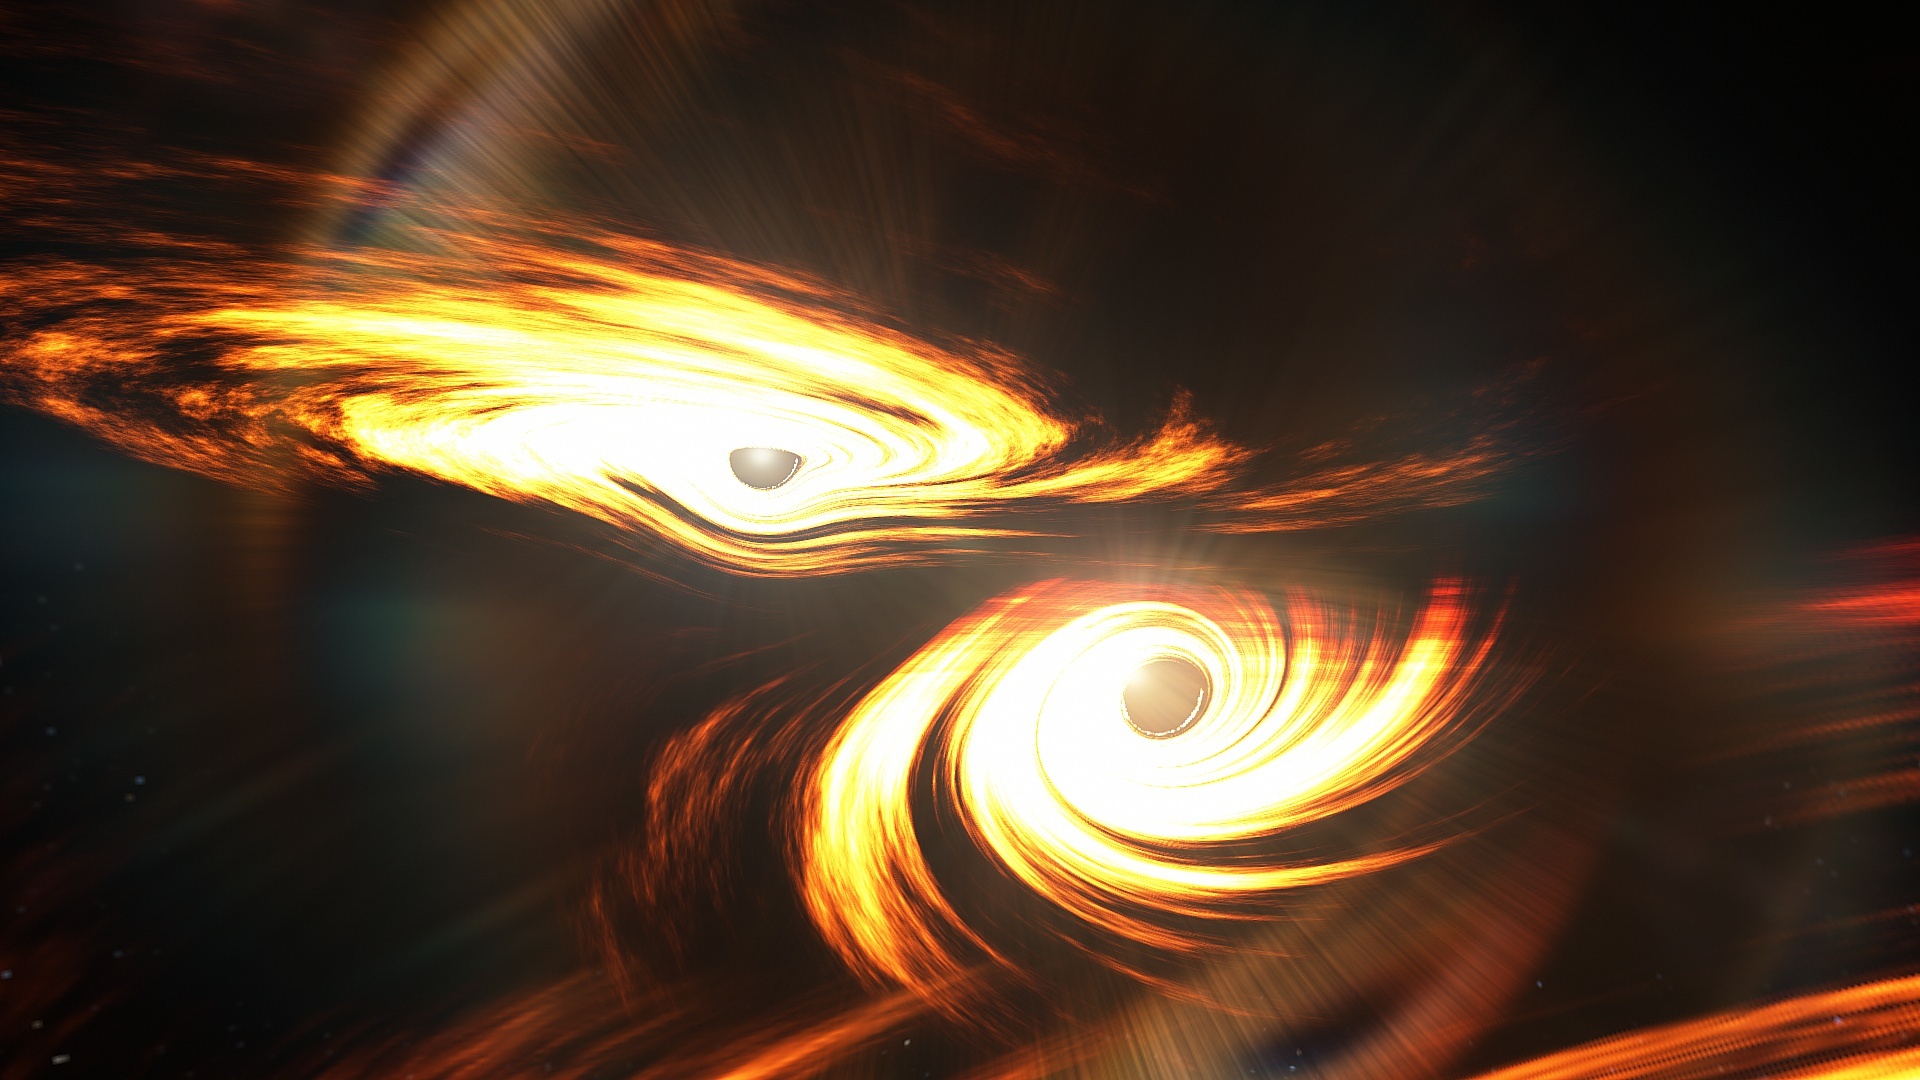 An artist’s impression of the collision of two black holes